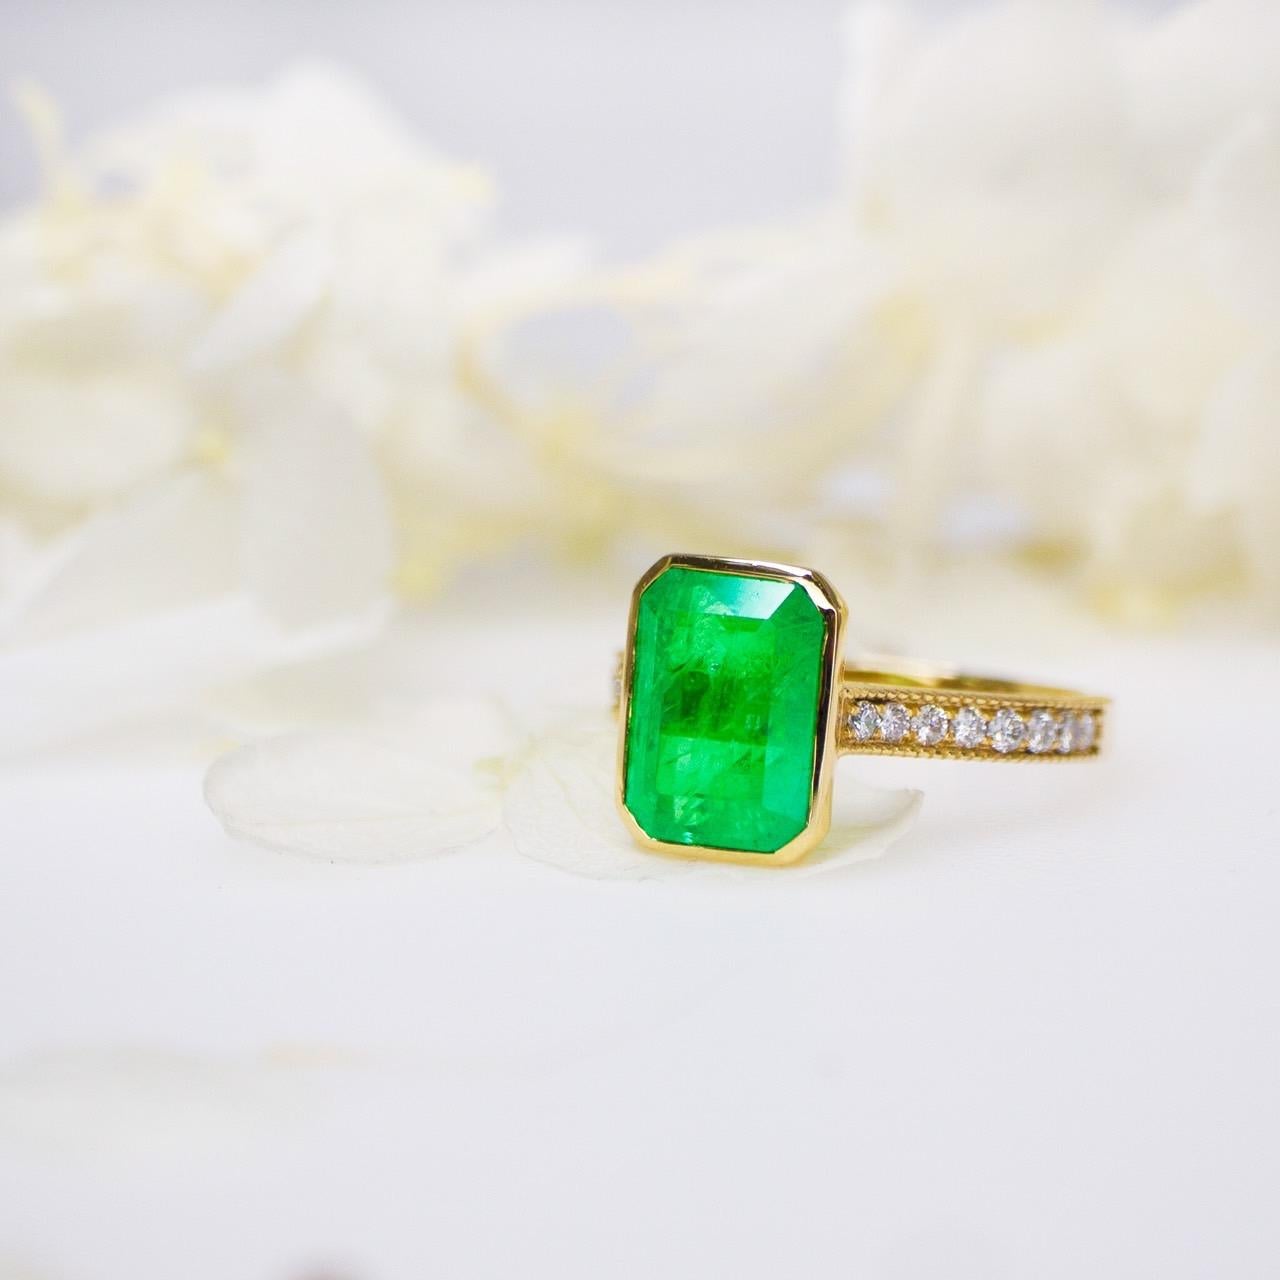 IGI 18K Yellow Gold 3.53 Ct Emerald Antique Art Deco Engagement Ring In New Condition For Sale In Kaohsiung City, TW